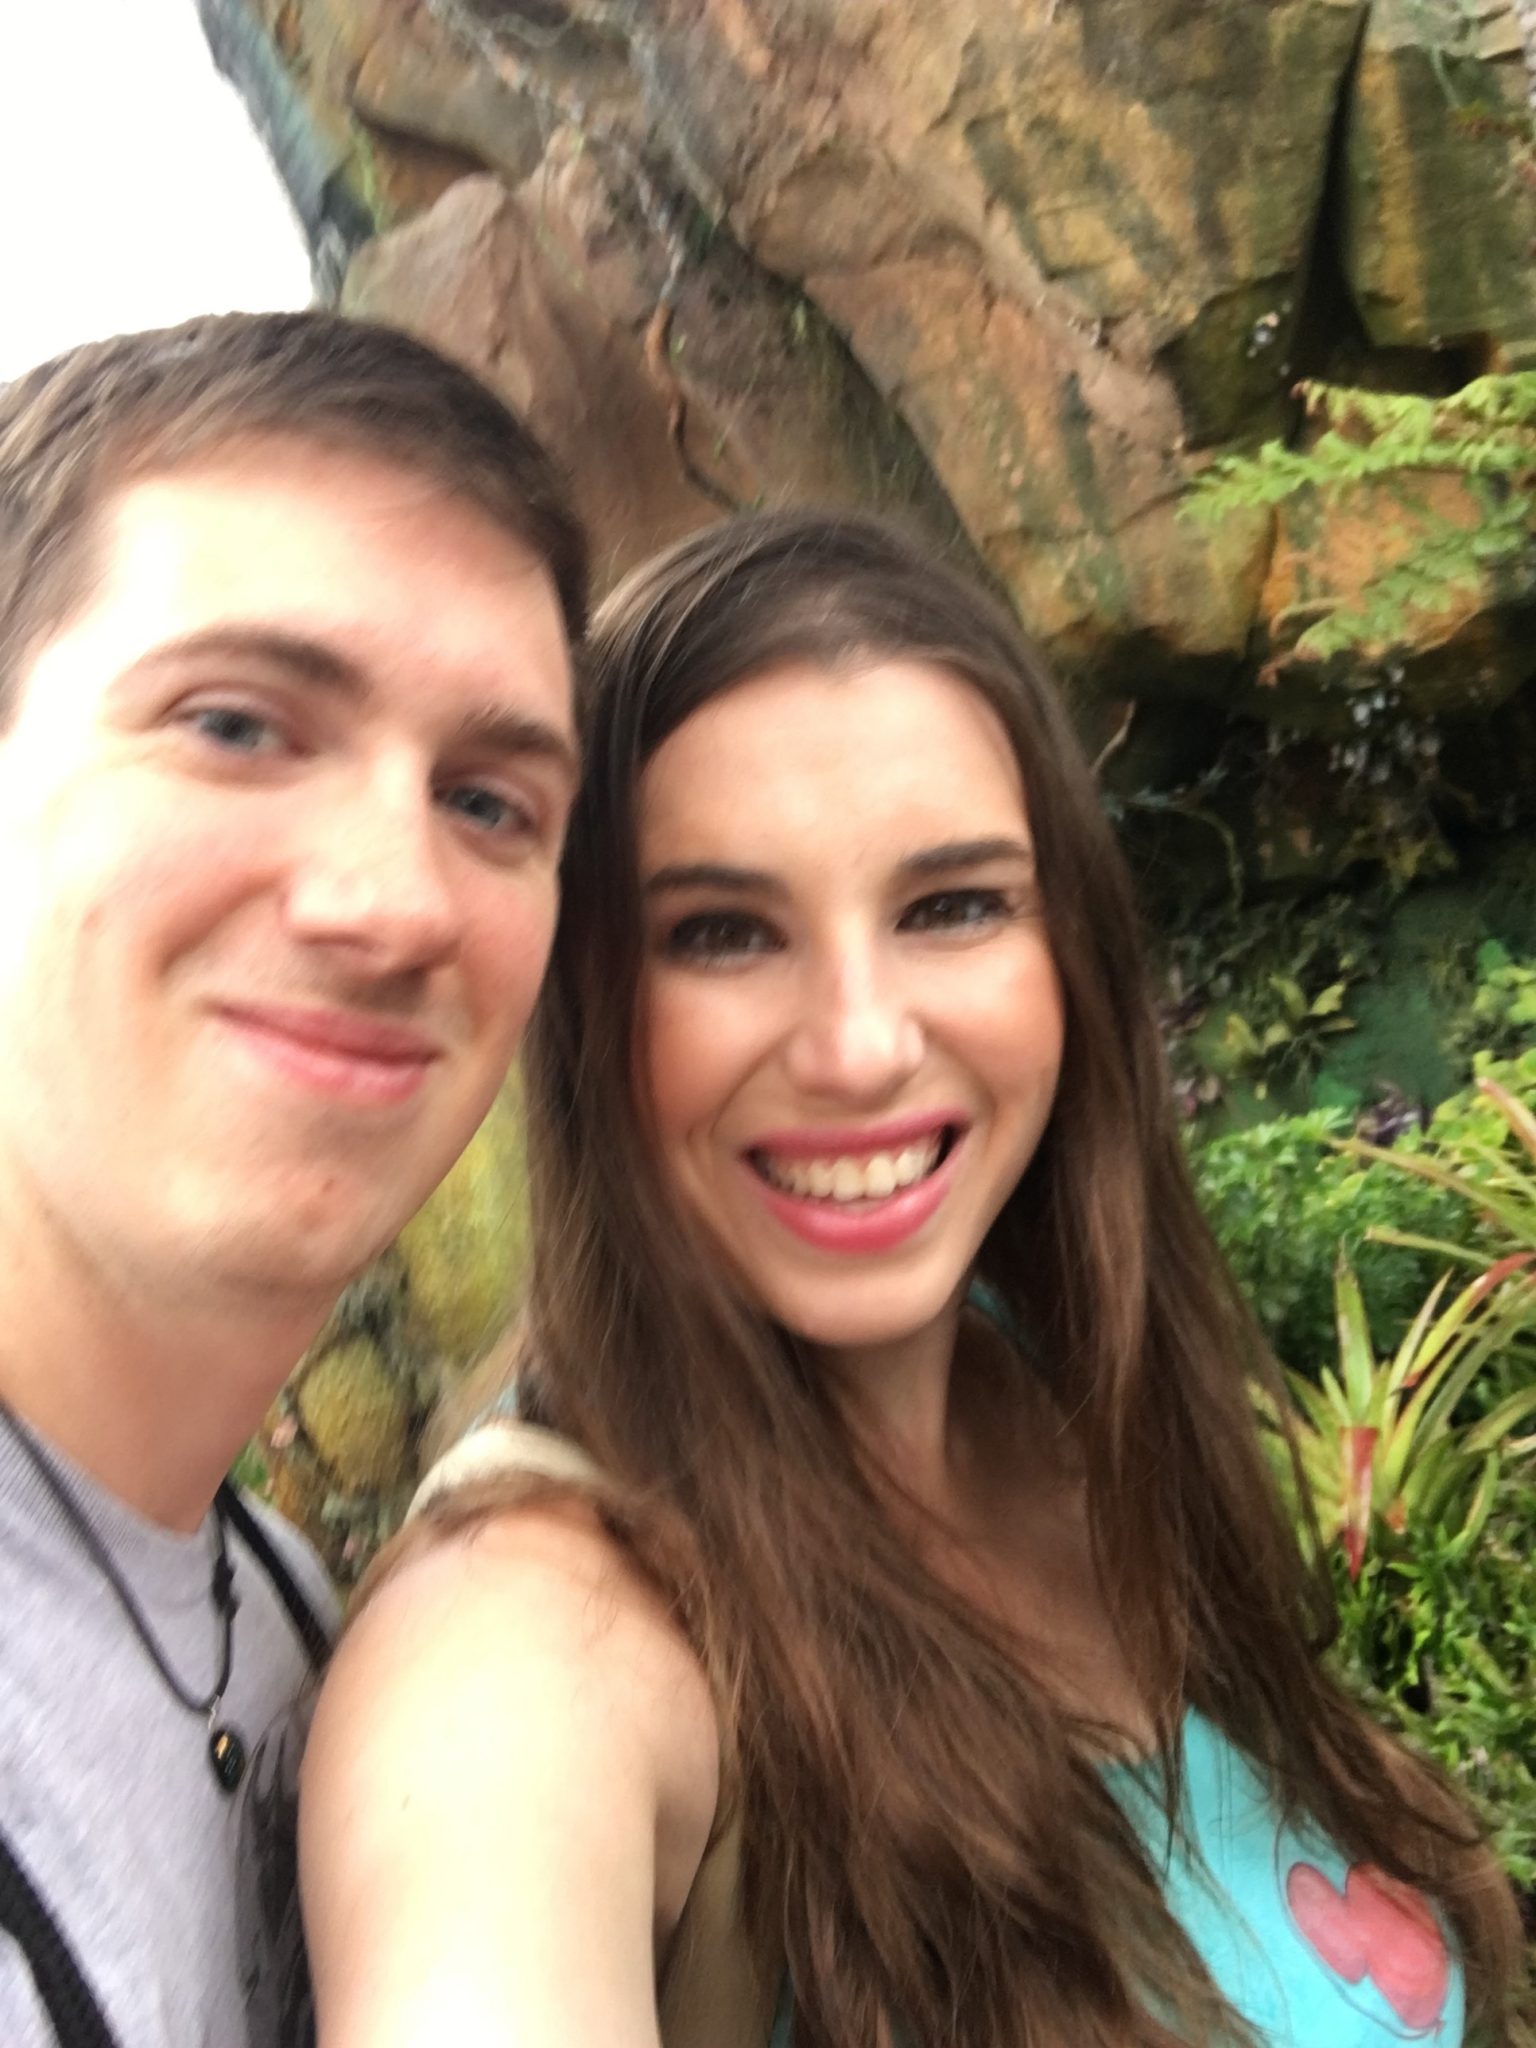 Chelsea and Robby in line for Flight of Passage in the rain.